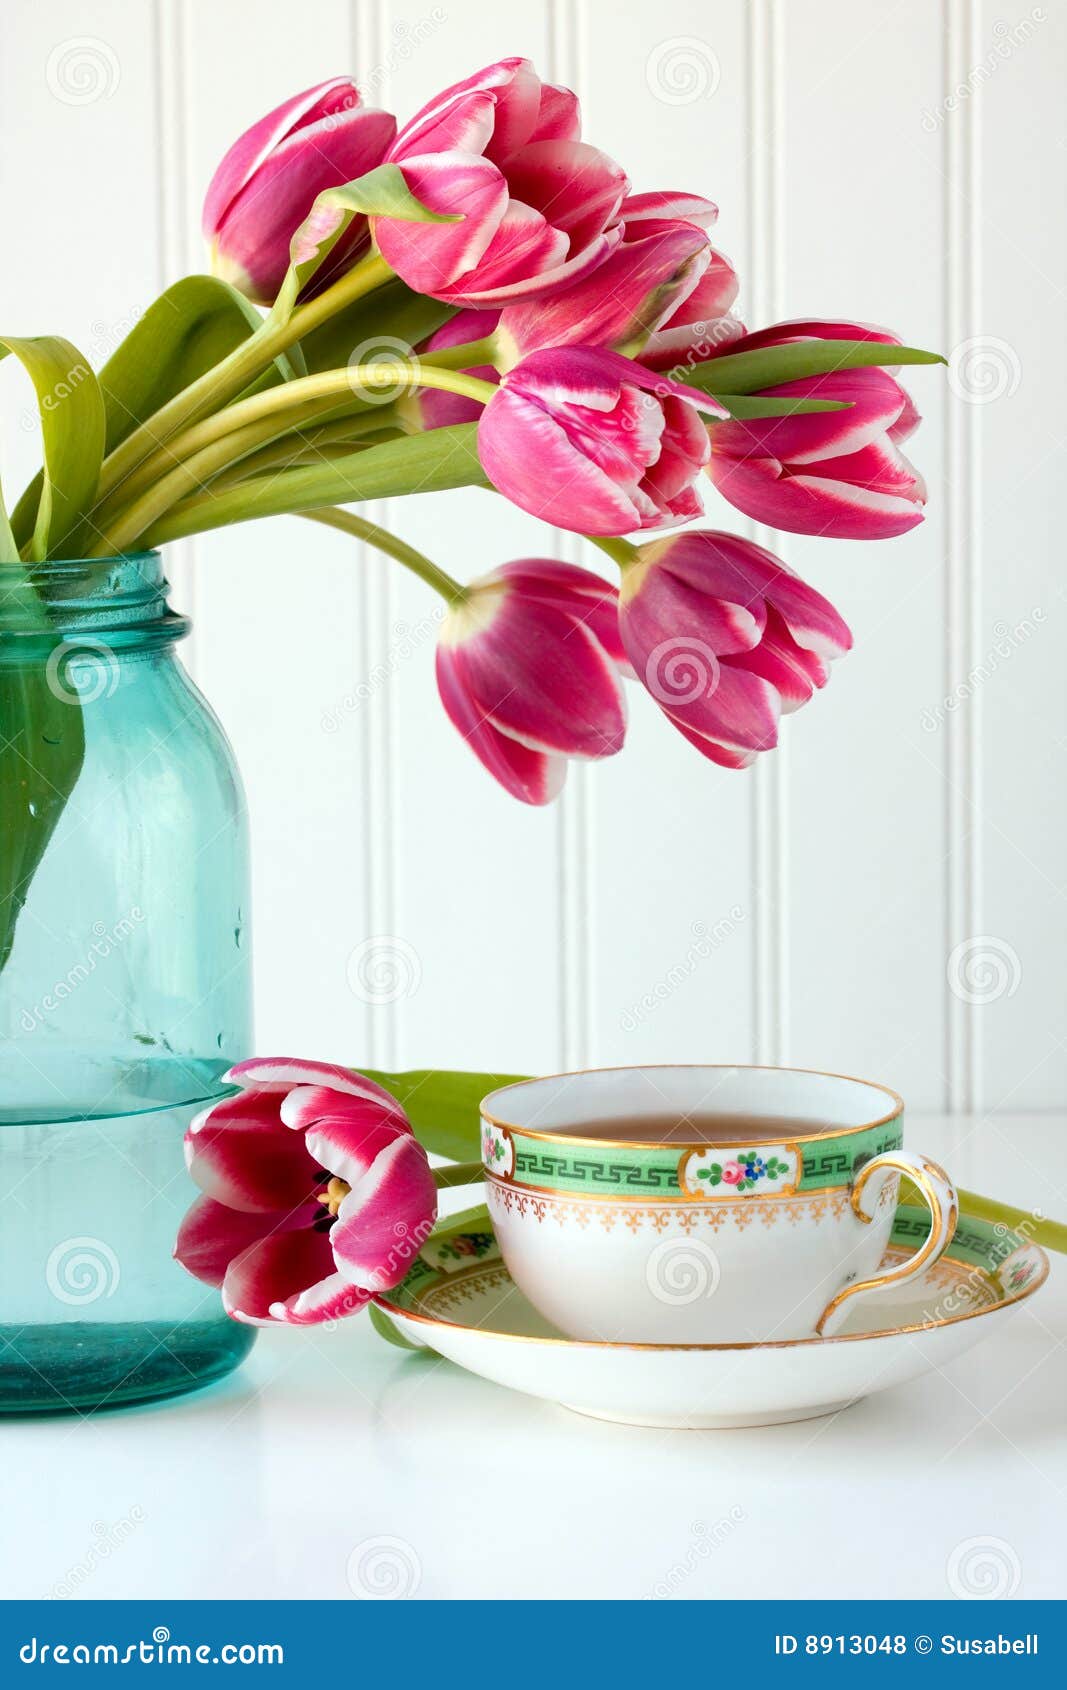 teacup and flowers